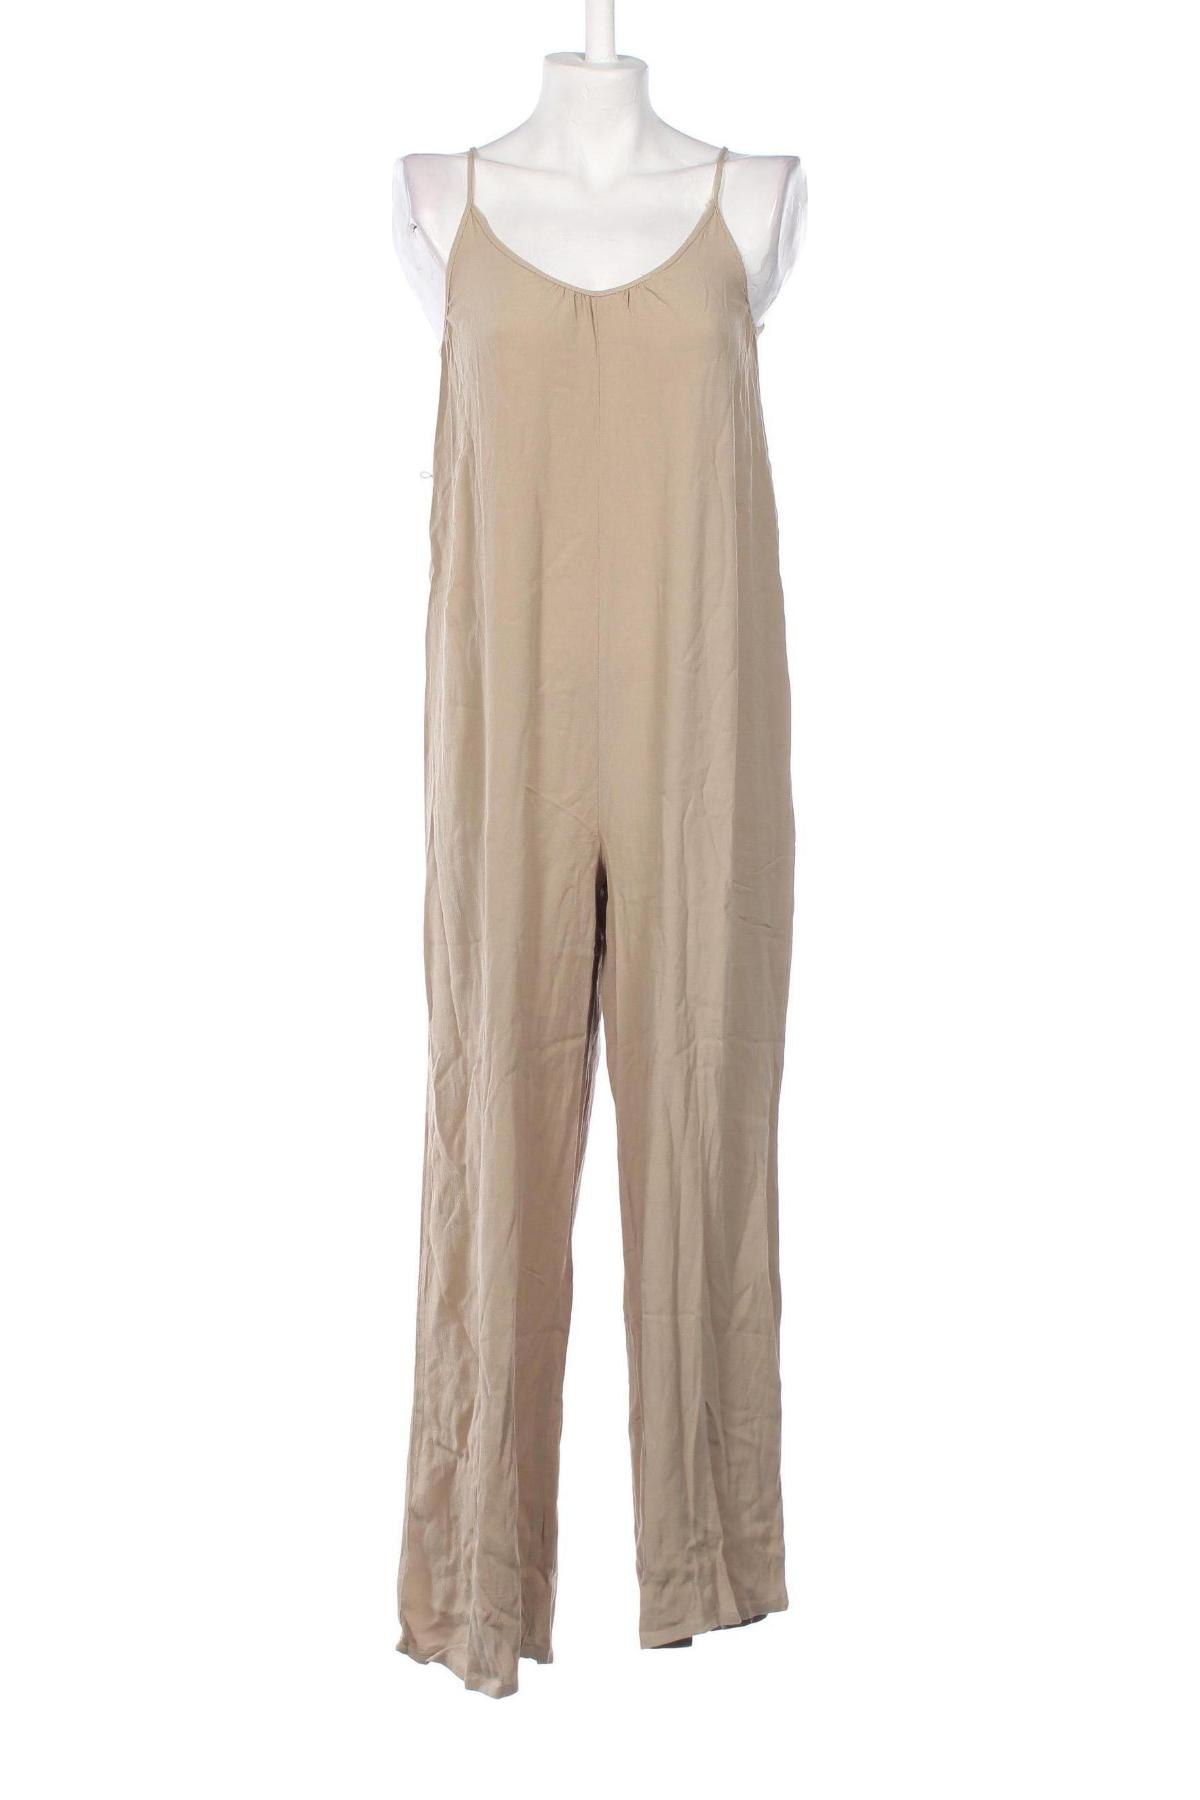 Damen Overall LeGer By Lena Gercke X About you, Größe XS, Farbe Beige, Preis € 12,78